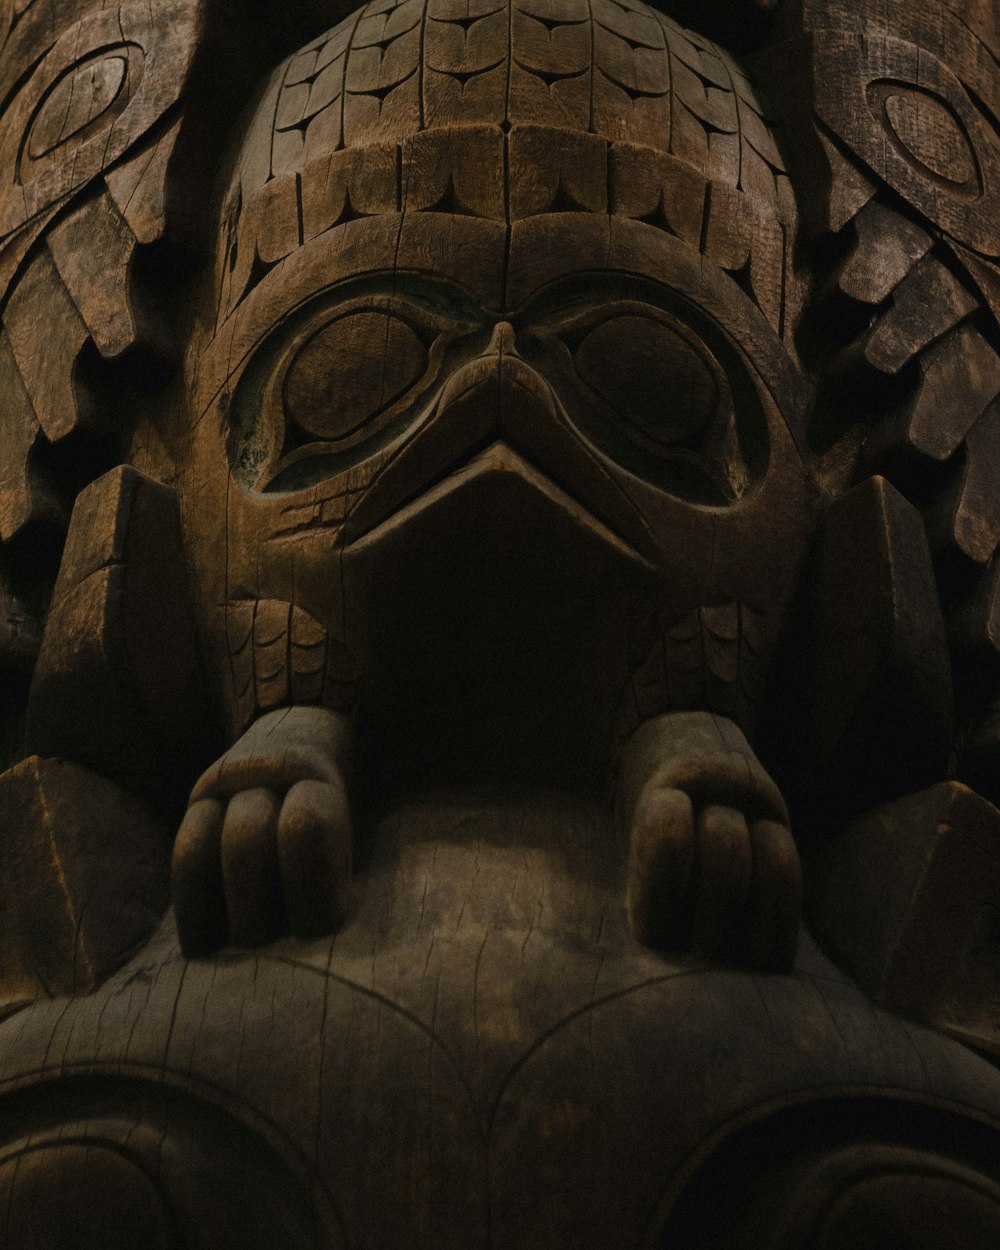 a wooden carving of a face on display